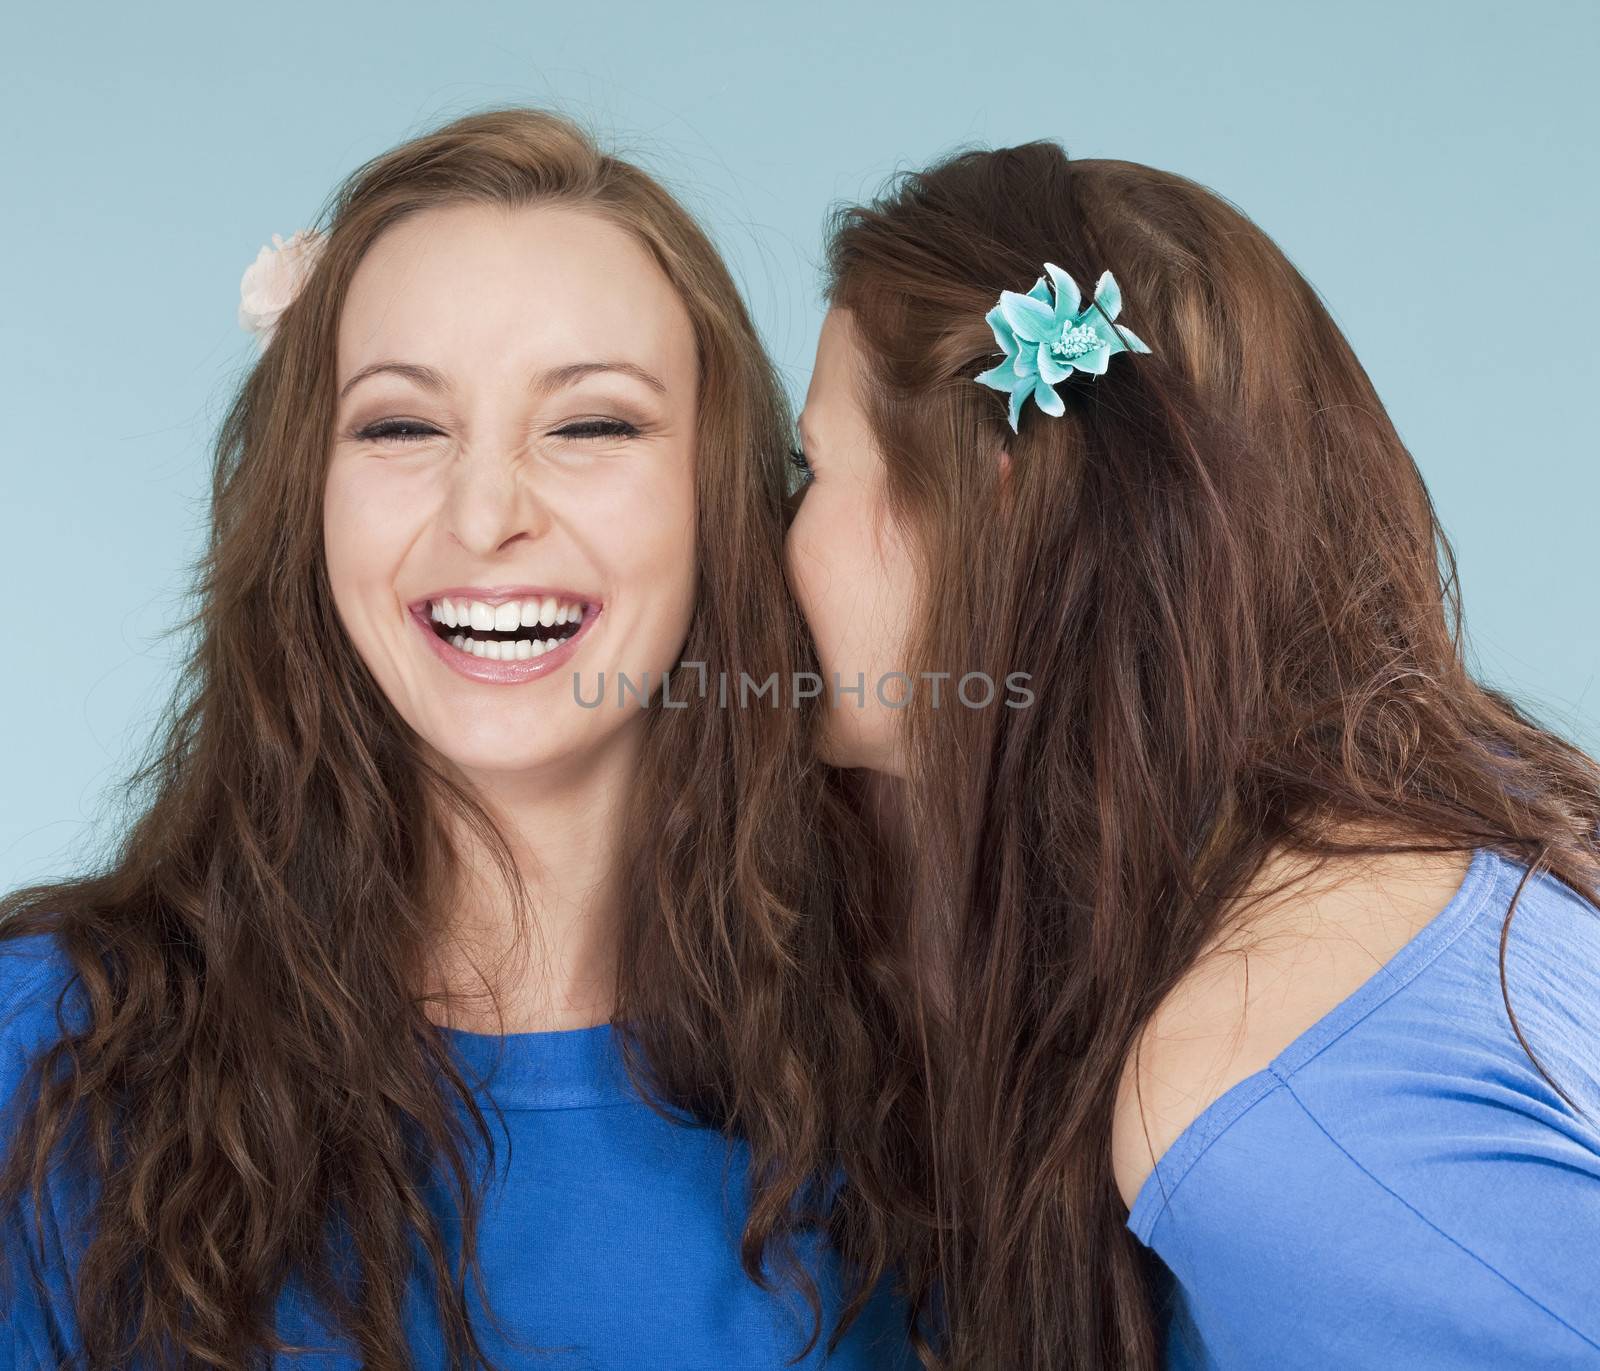 two young female friends whispering gossip - isolated on blue